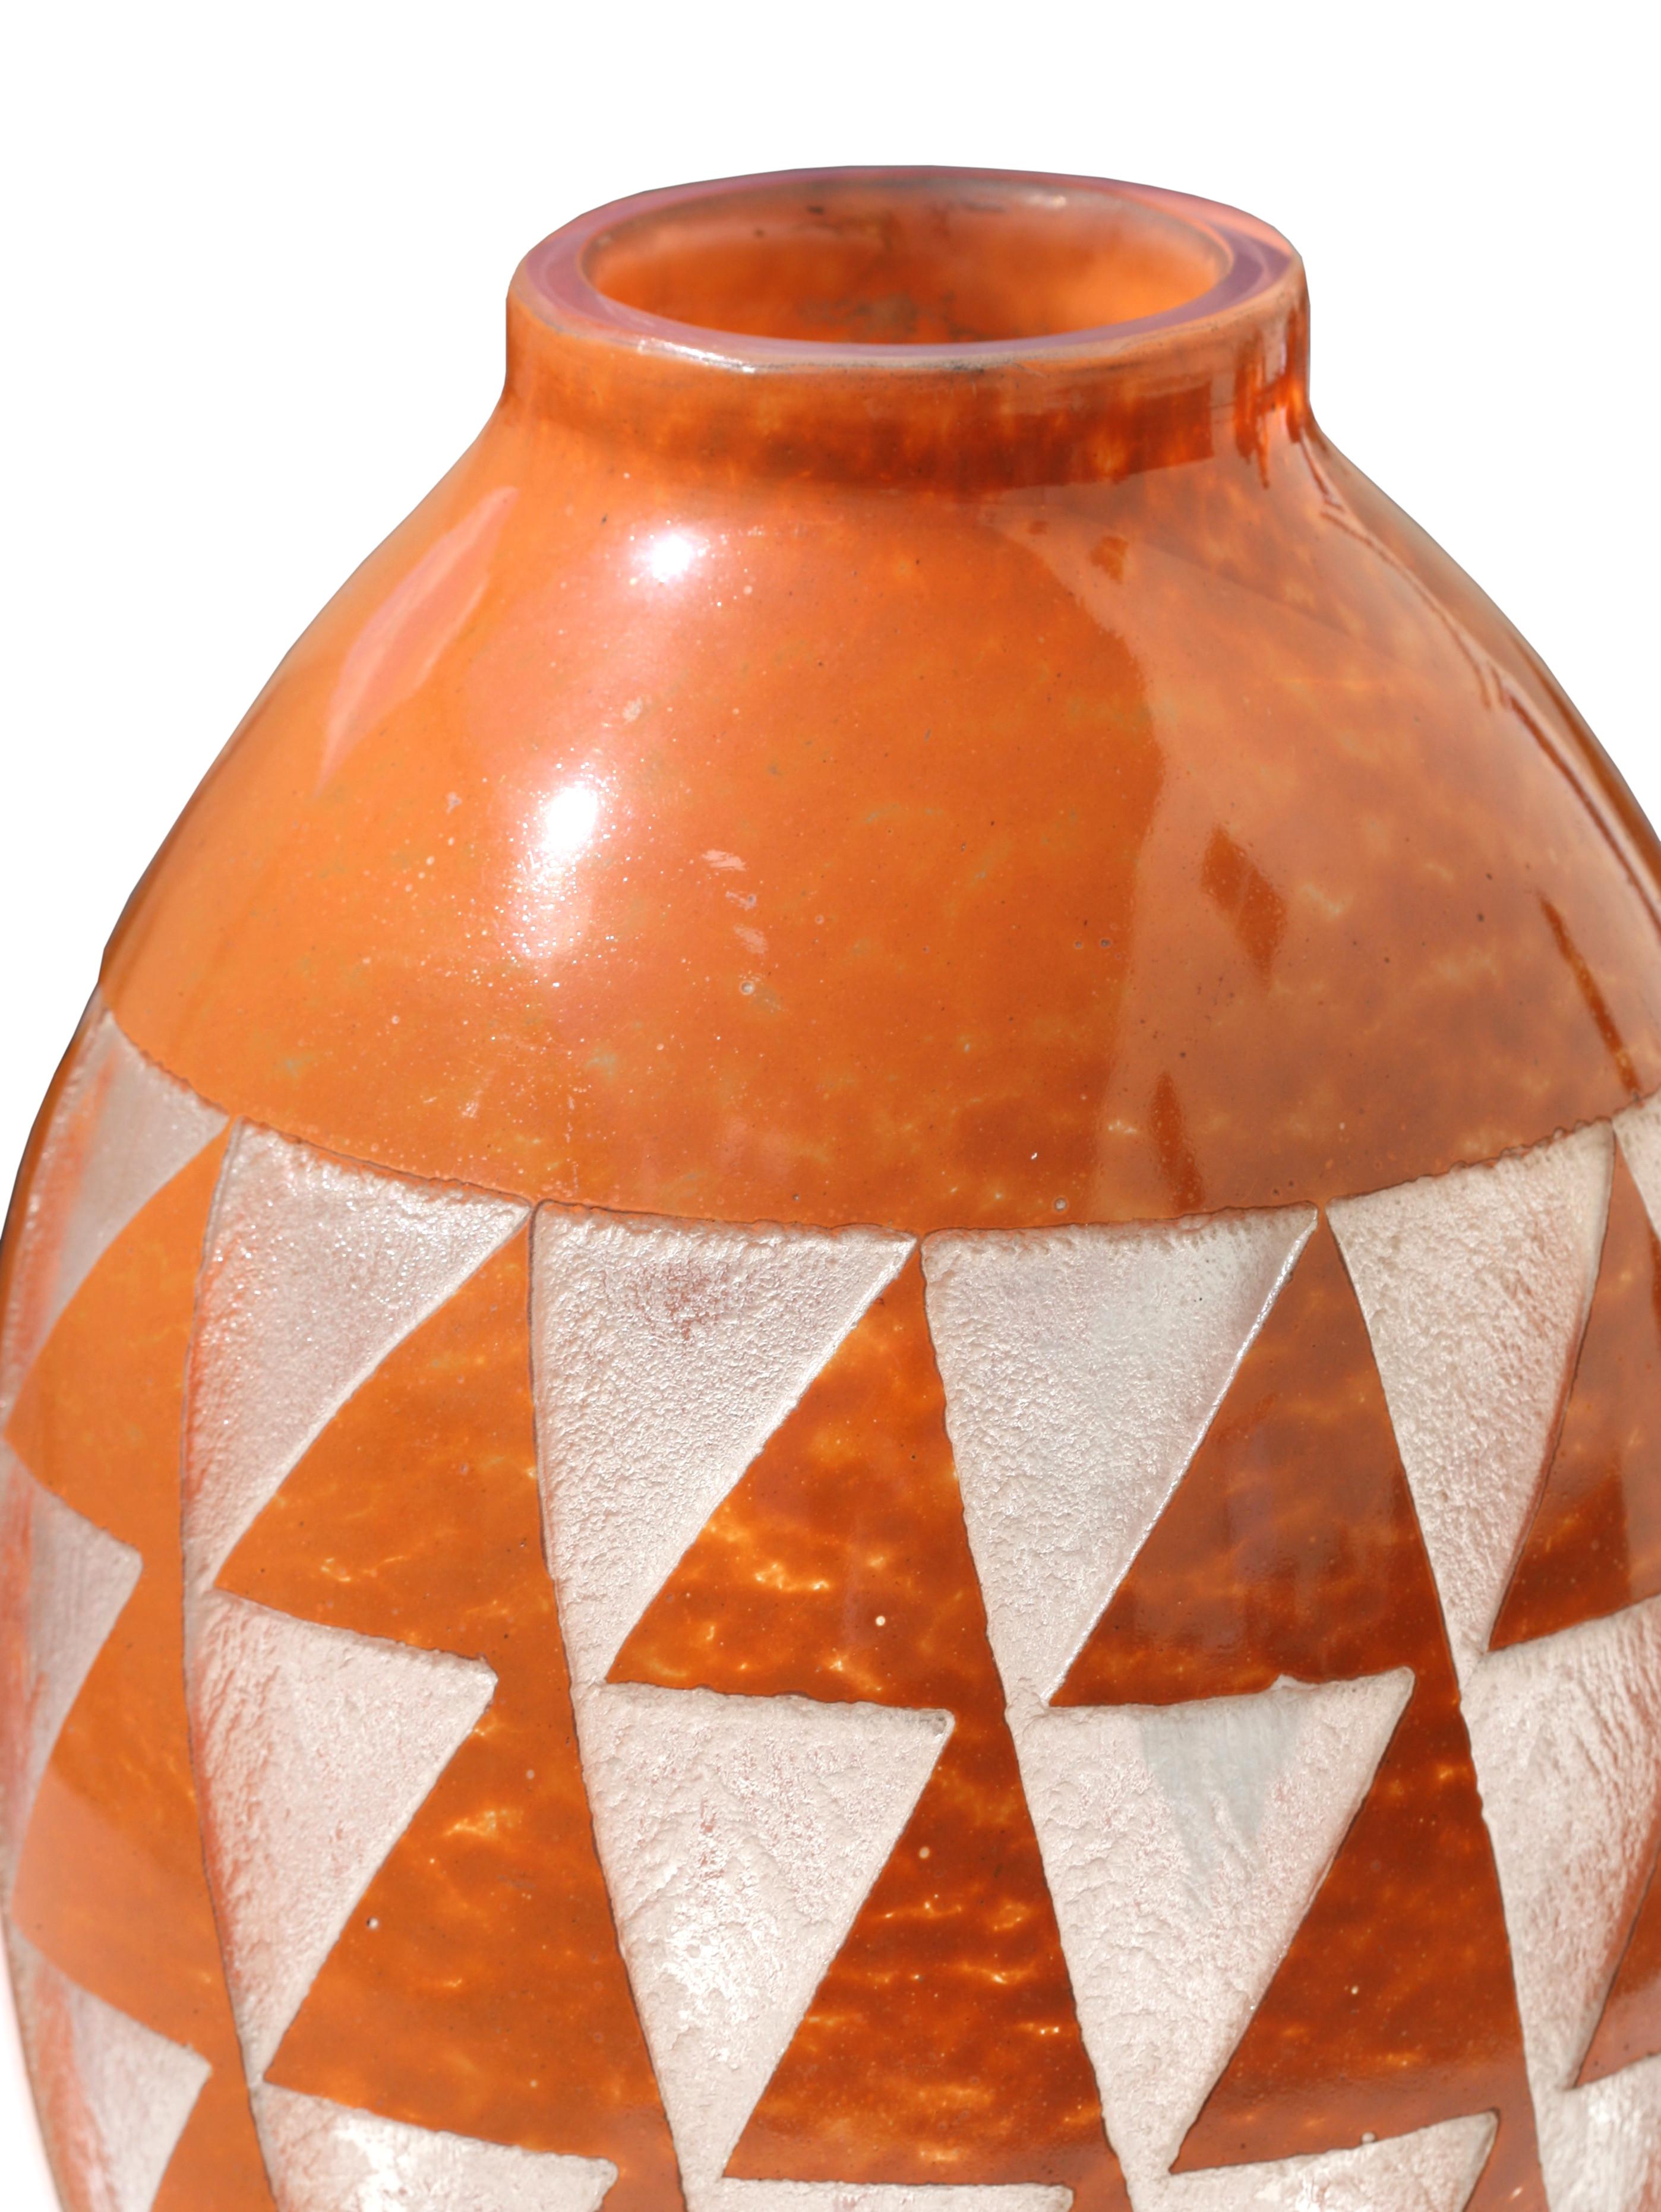 A Large Degue Art Deco Acid-Etched Glass Vase, the orange coloured glass of ovoid form, the exterior etched with stylized triangles on a circular base, signed to the rim, Degue
Measures: Height 16.5 in. (41.9 cm.) 
Diameter 10 in. (25.1 cm.).